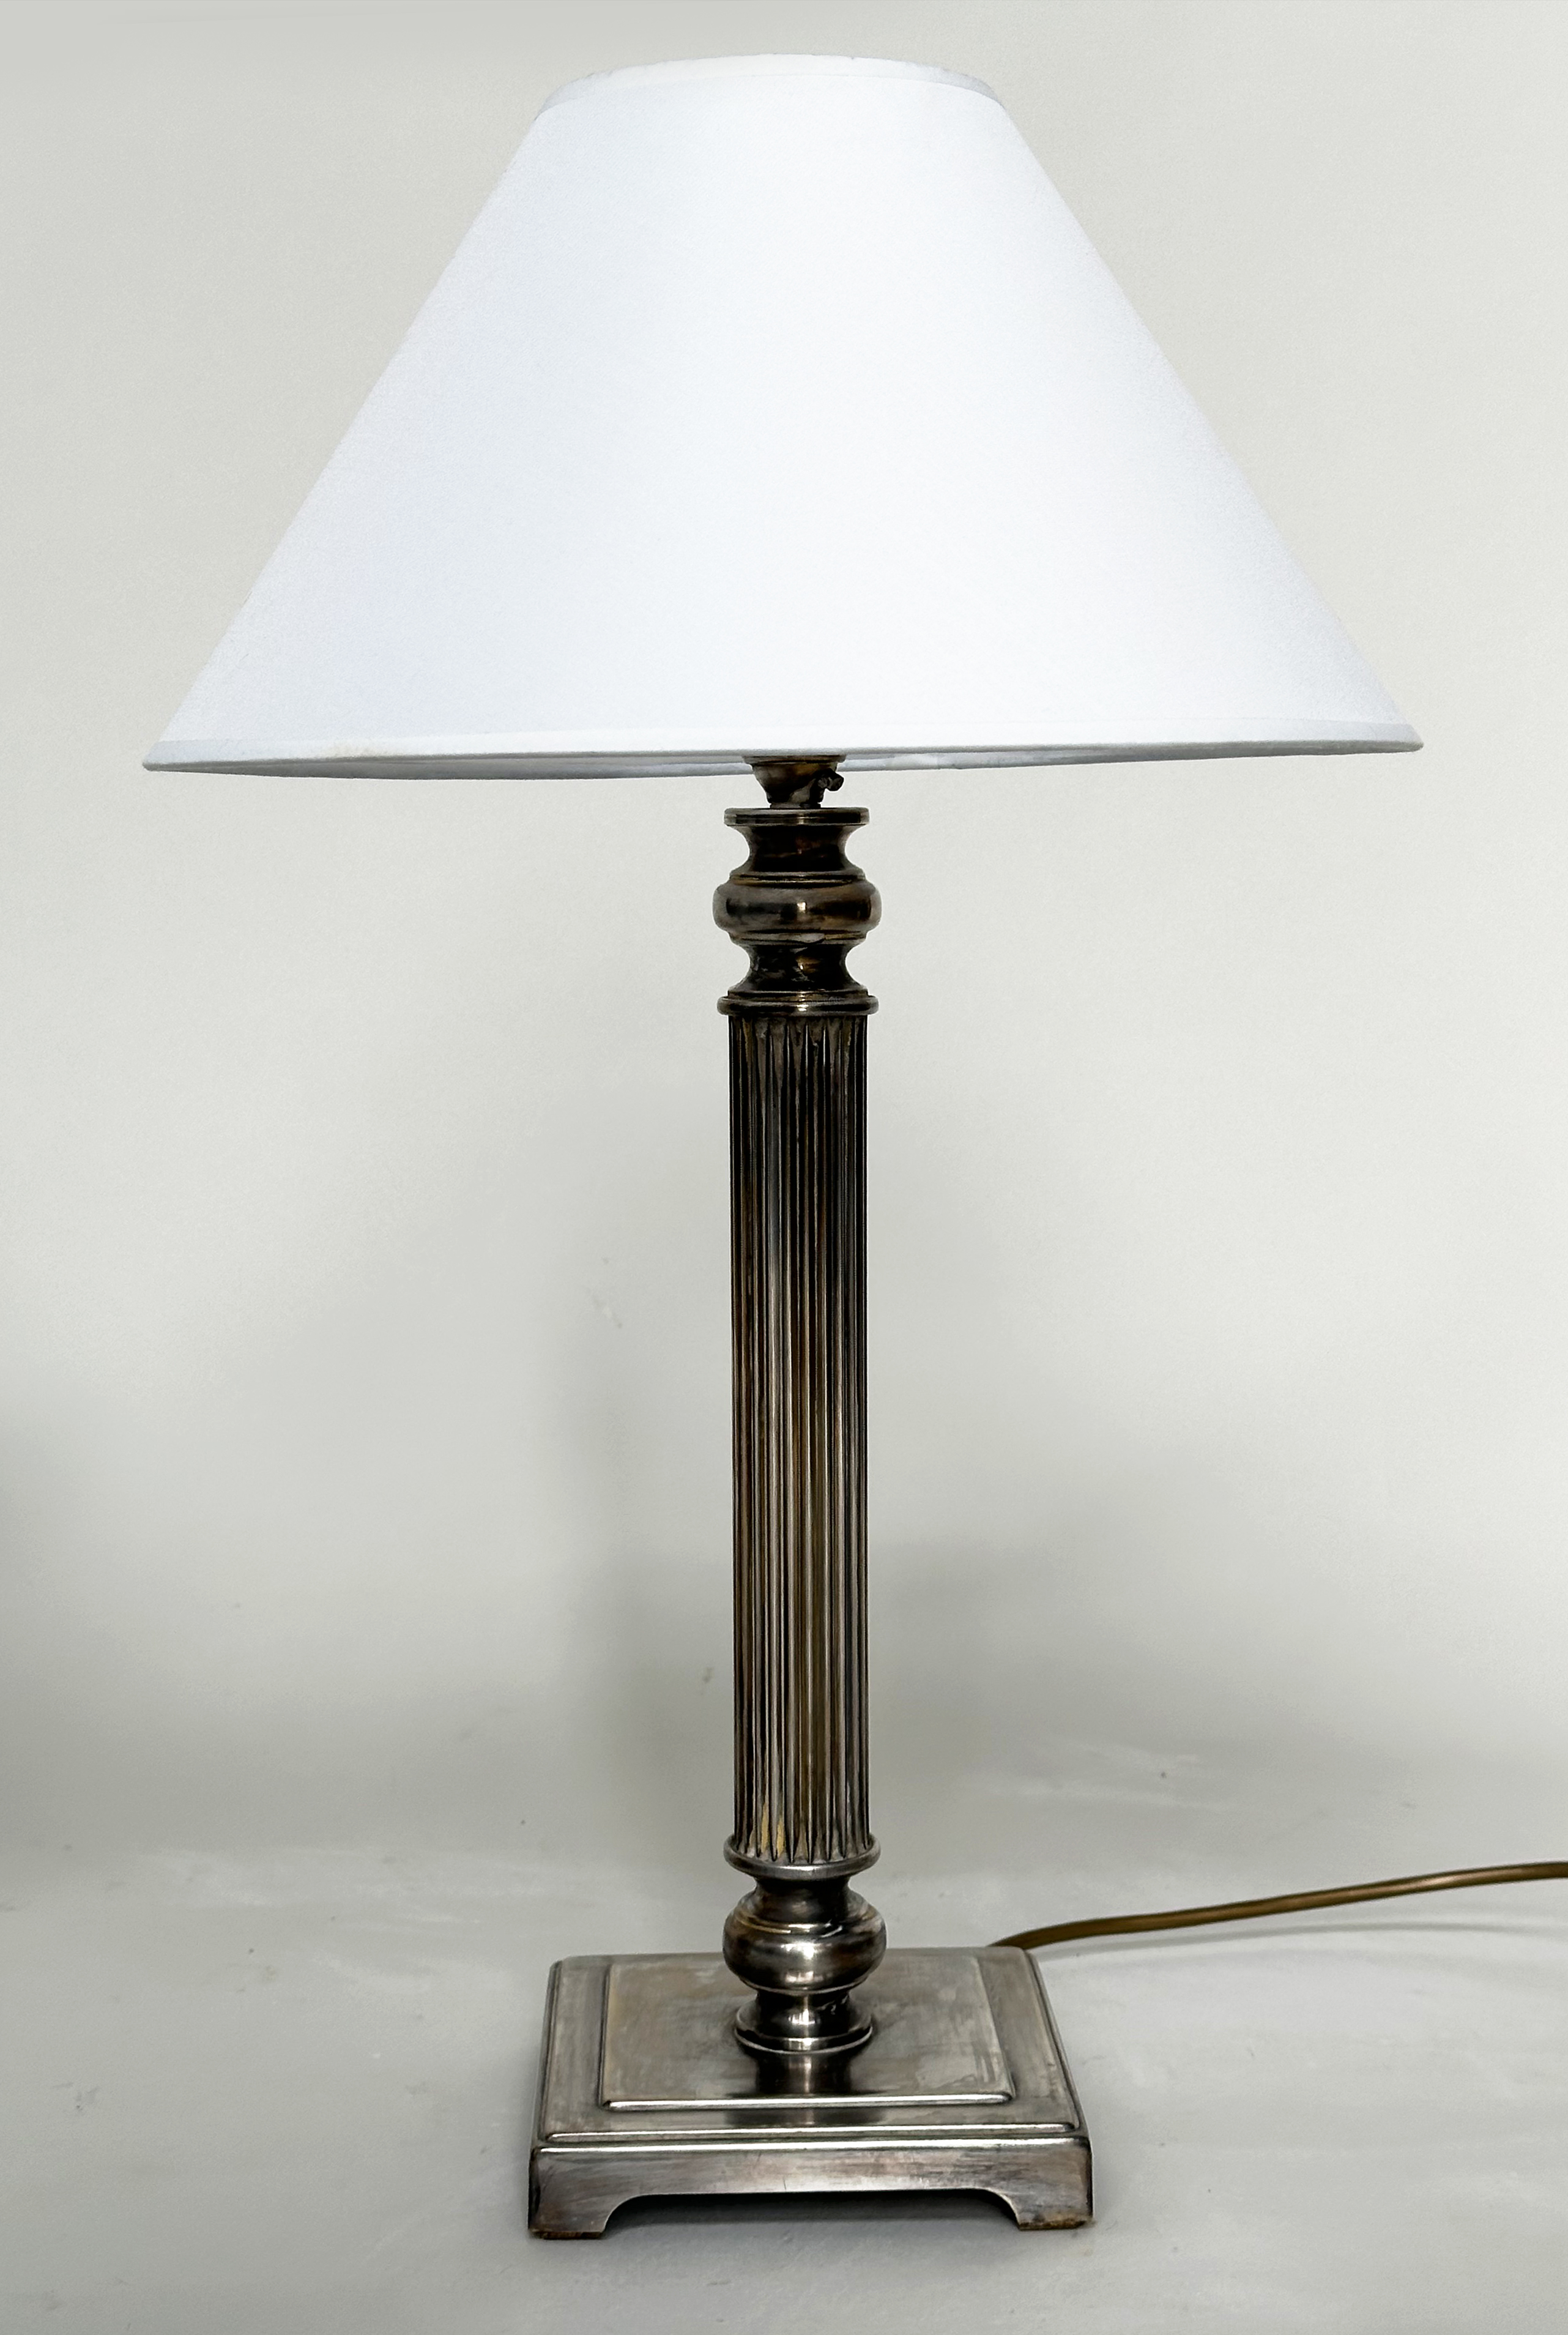 TABLE LAMPS, a pair, silvered metal each with reeded column, and square bases (with shades), 66cm H. - Image 4 of 6